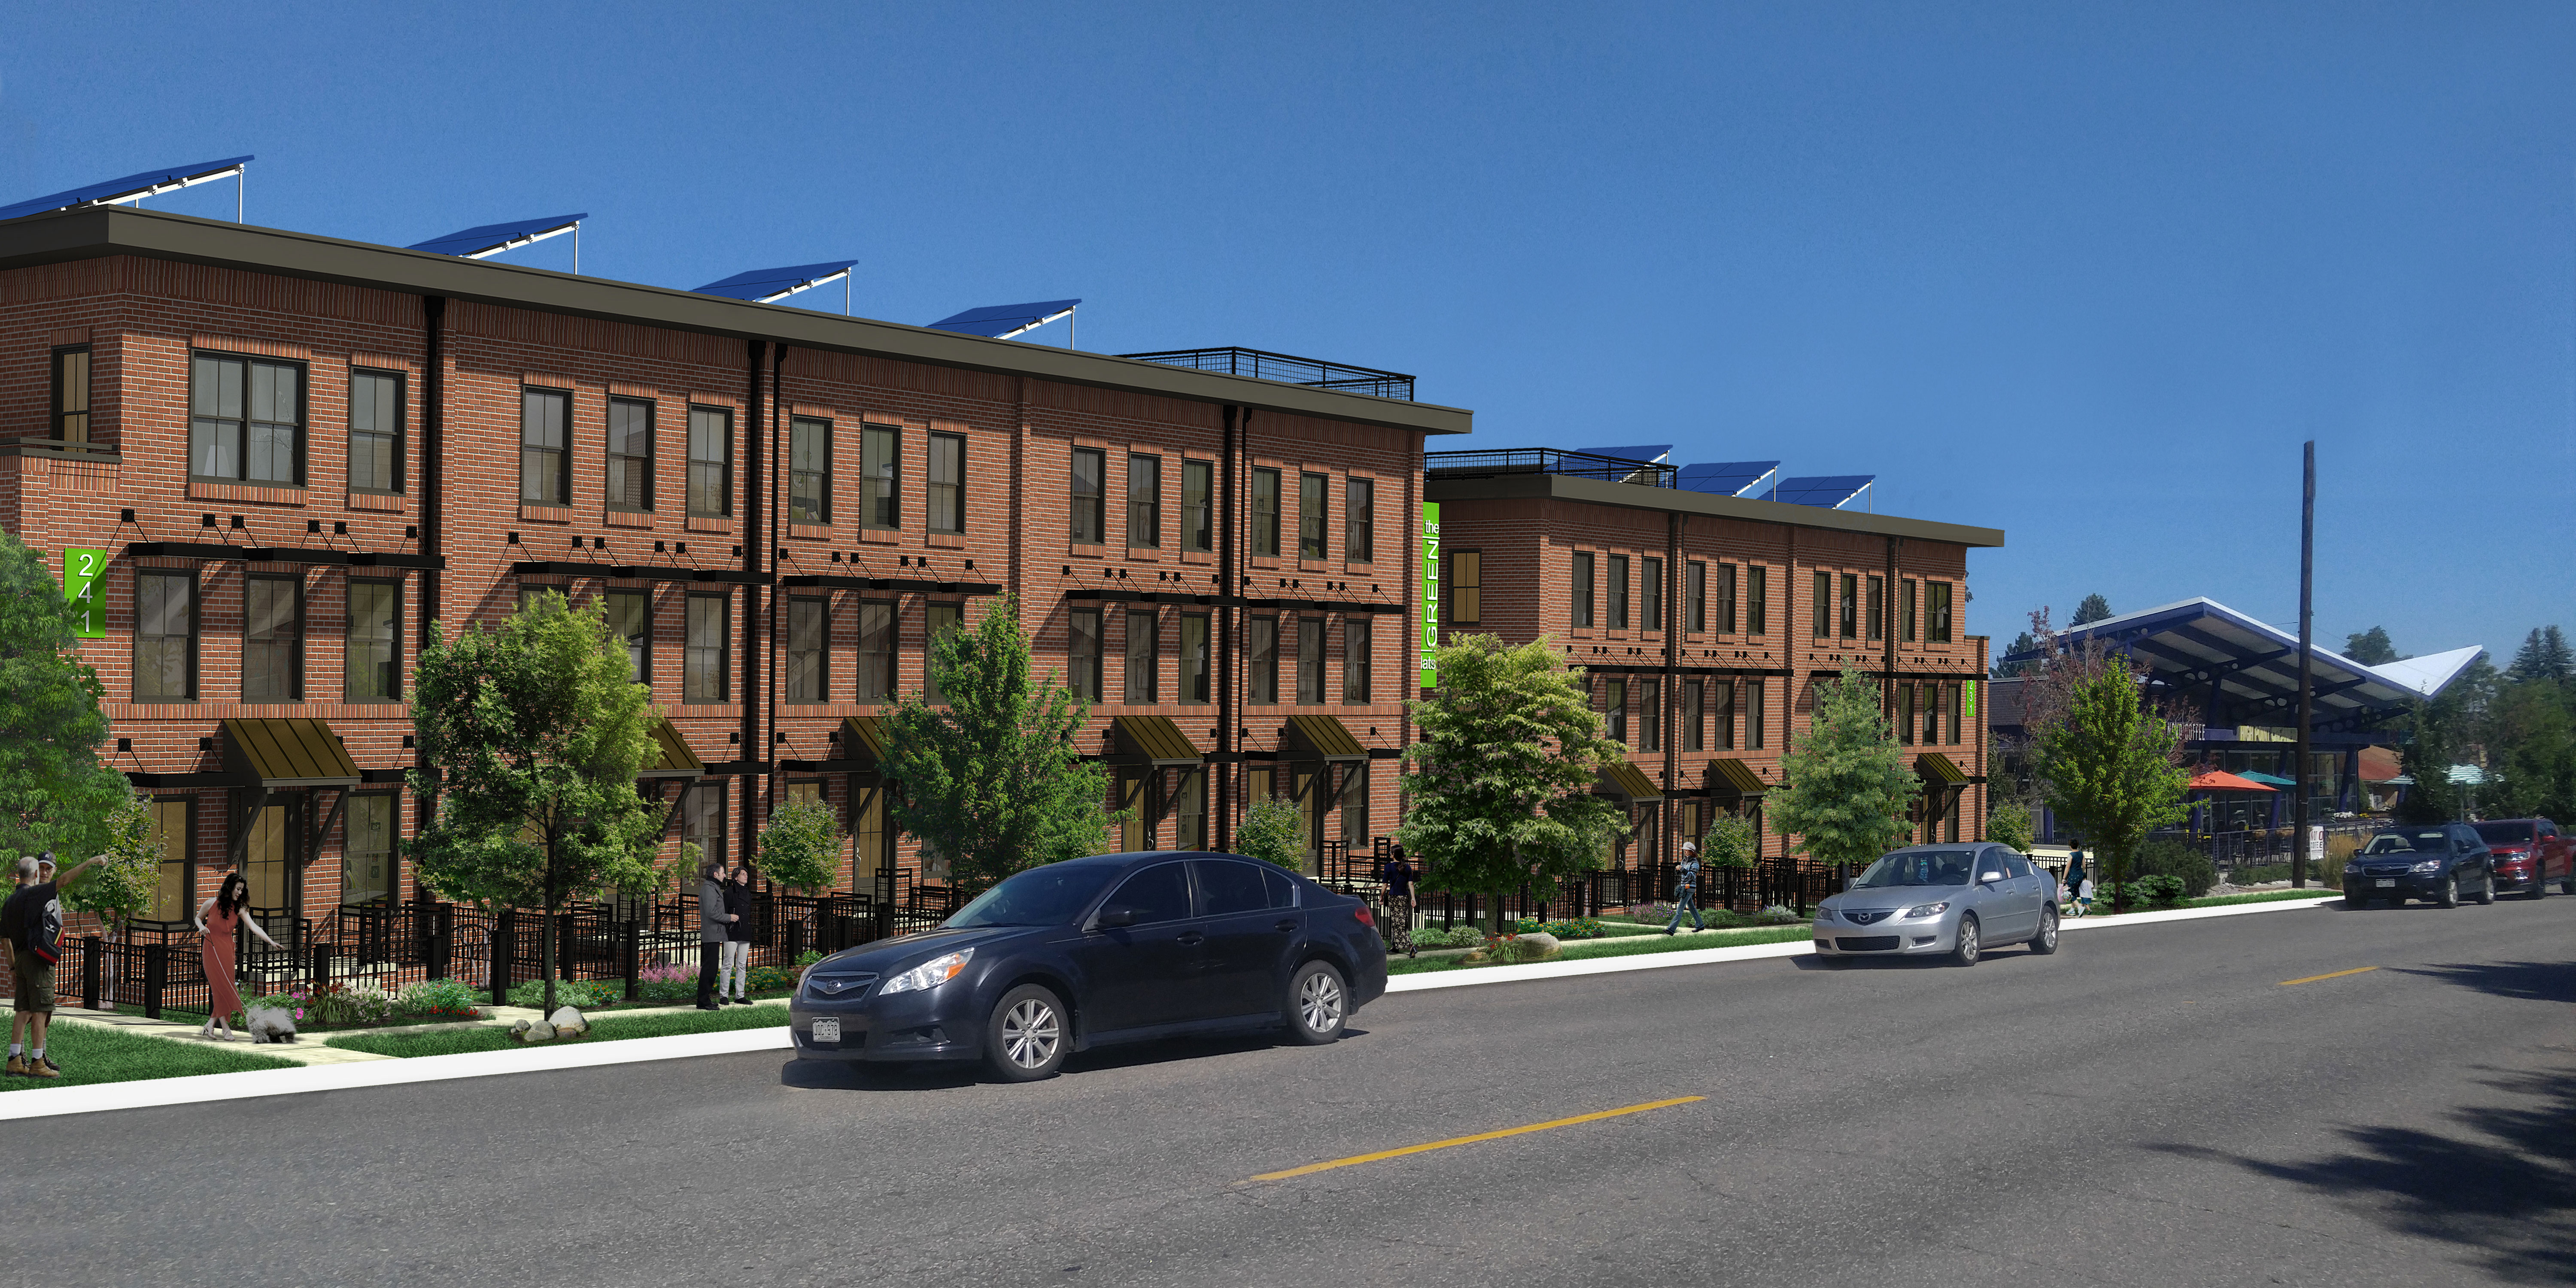 Hilltop Neighbors Upset By A Proposed 27-Unit Condominium Project On Holly Street